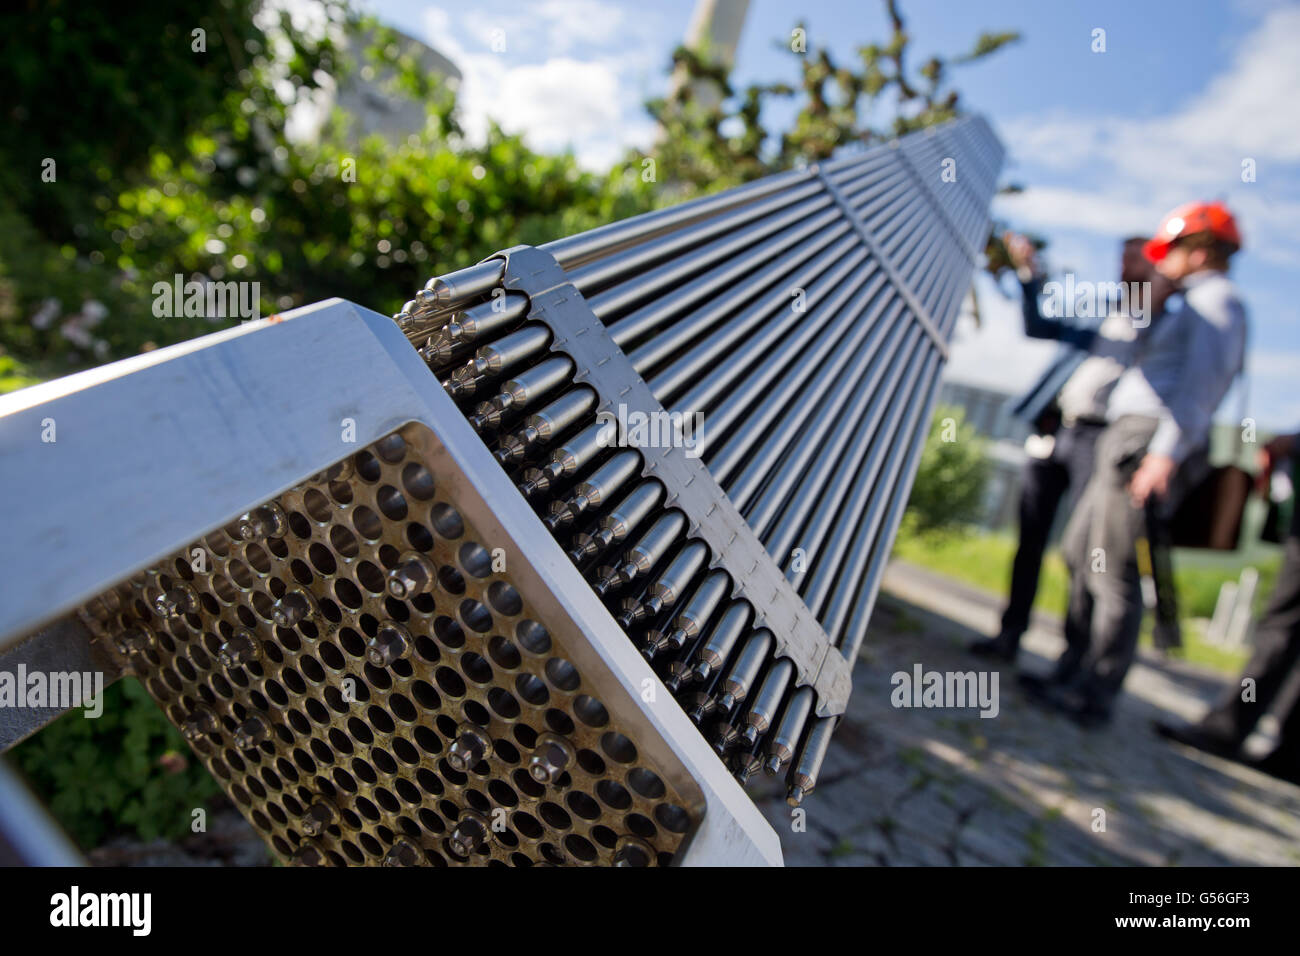 Grafenrheinfeld, Germany. 31st May, 2016. A model of a fuel assembly with fuel and control rods on the grounds of the Nuclear power plant in Grafenrheinfeld, Germany, 31 May 2016. The nuclear power plant, which has lost power a year ago, is currently under decommissioning. The operator of the power plant is planning to finish the demolition to by approximately 2035. Photo: DANIEL KARMANN/dpa/Alamy Live News Stock Photo